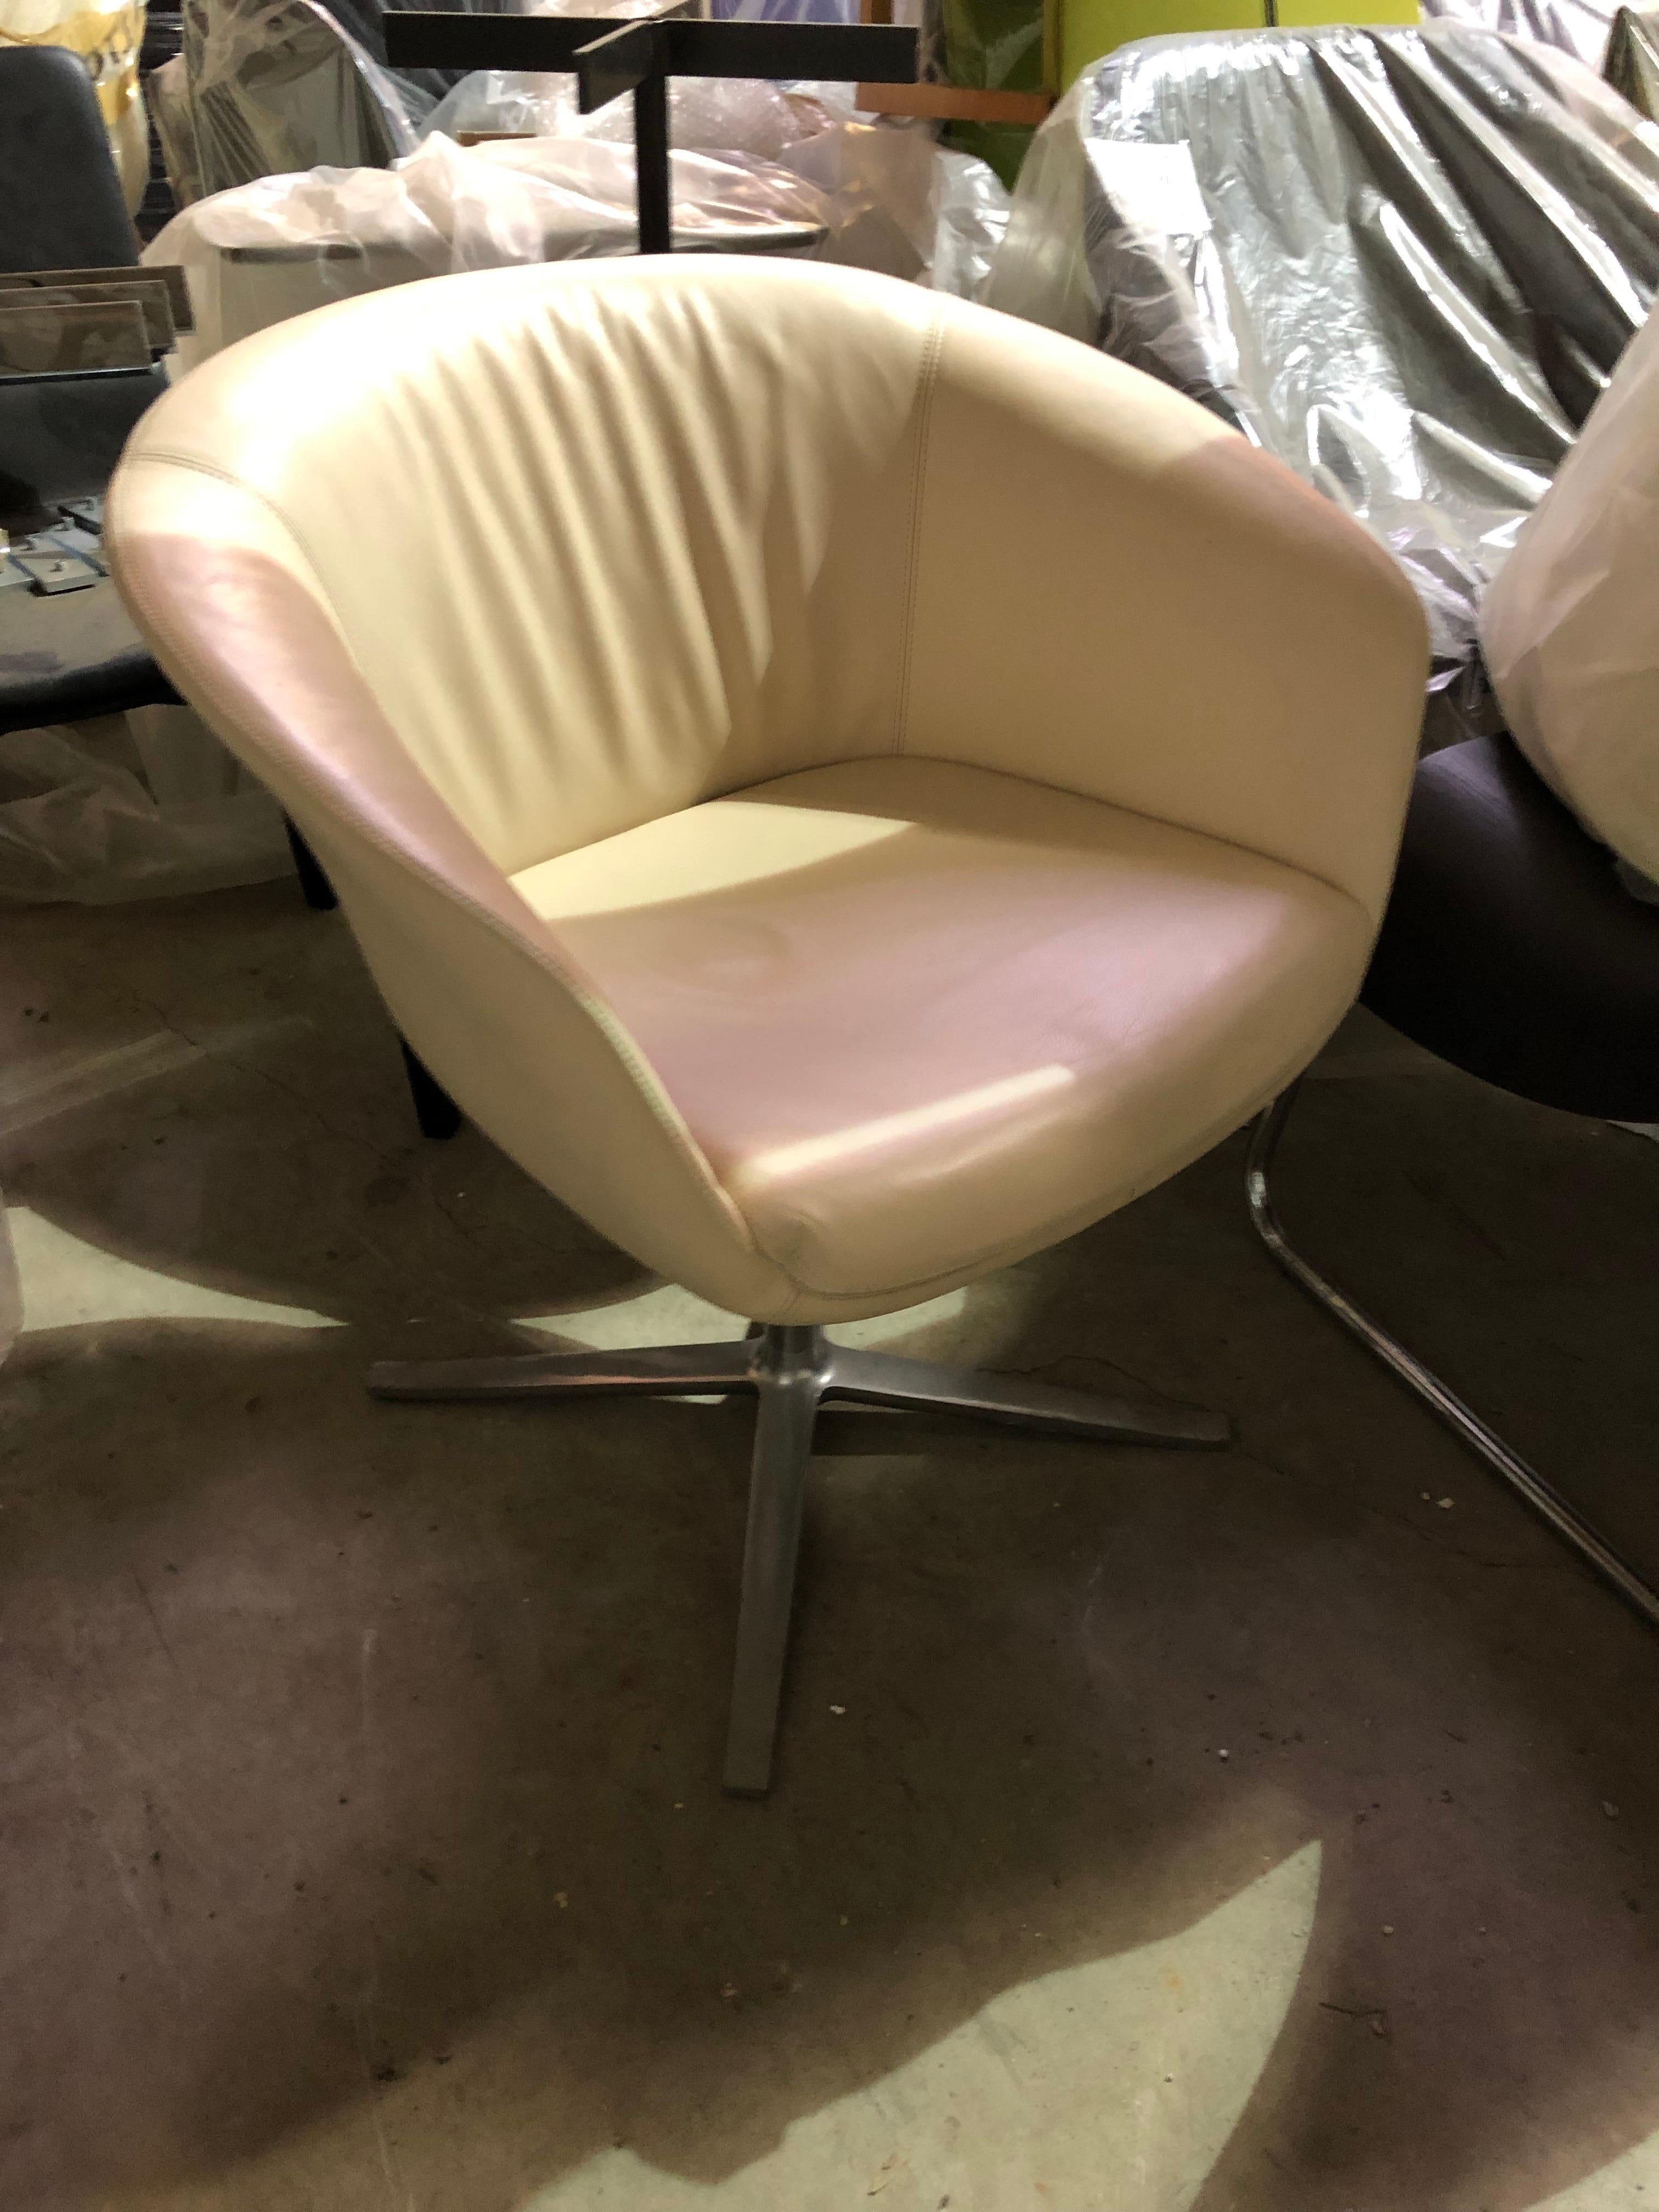 There are no right angles in nature. Maybe that’s why this wraparound shell instinctively looks so appealing and so modern again in this techie world of ours. Bob the bucket seat strikes a contemporary chord. Charmingly styled with gently rising